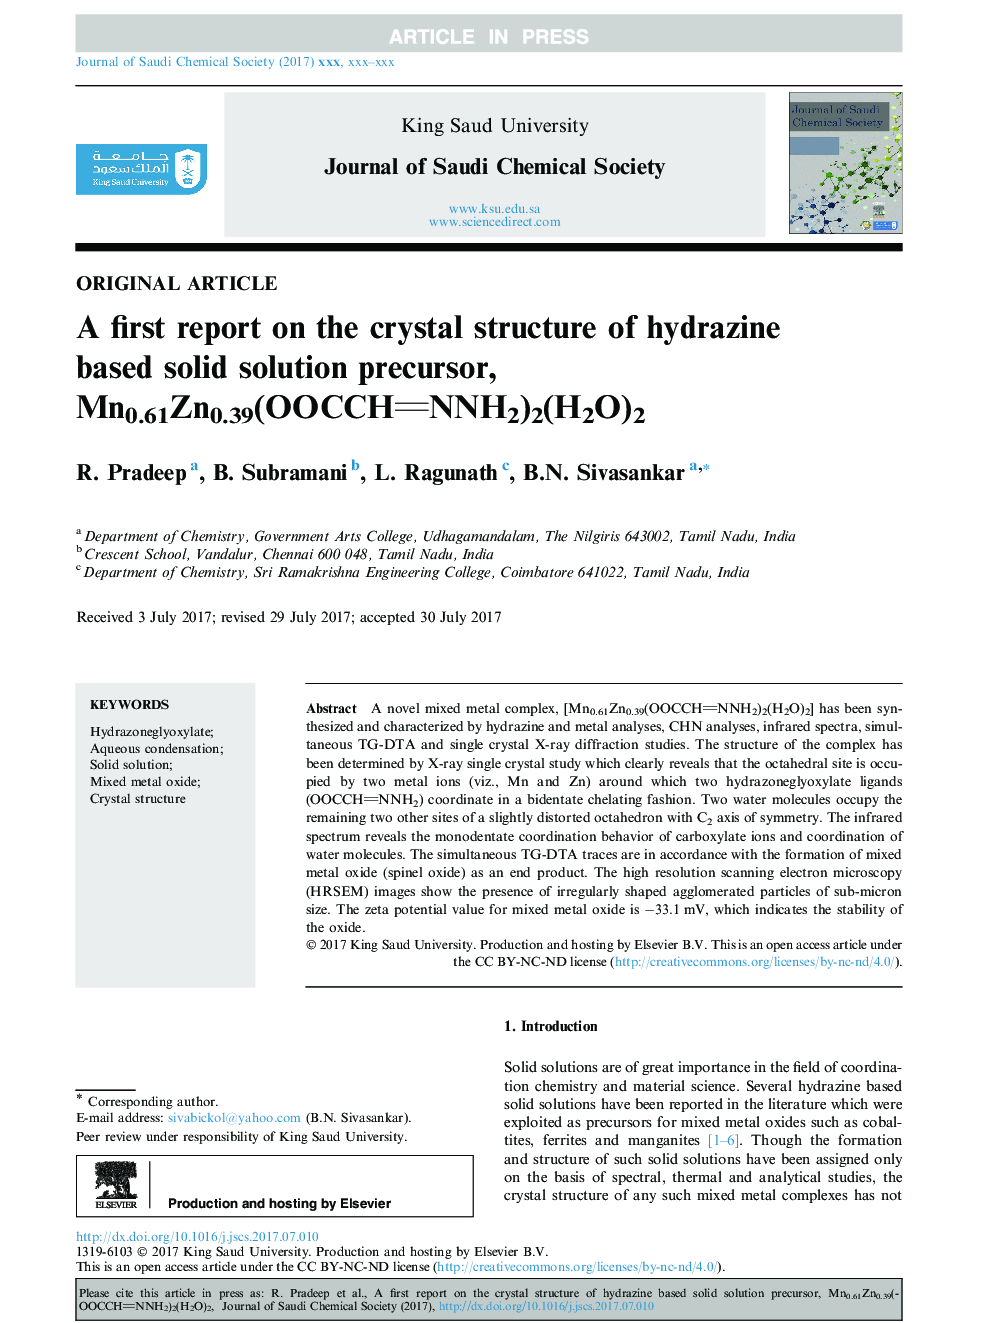 A first report on the crystal structure of hydrazine based solid solution precursor, Mn0.61Zn0.39(OOCCHNNH2)2(H2O)2